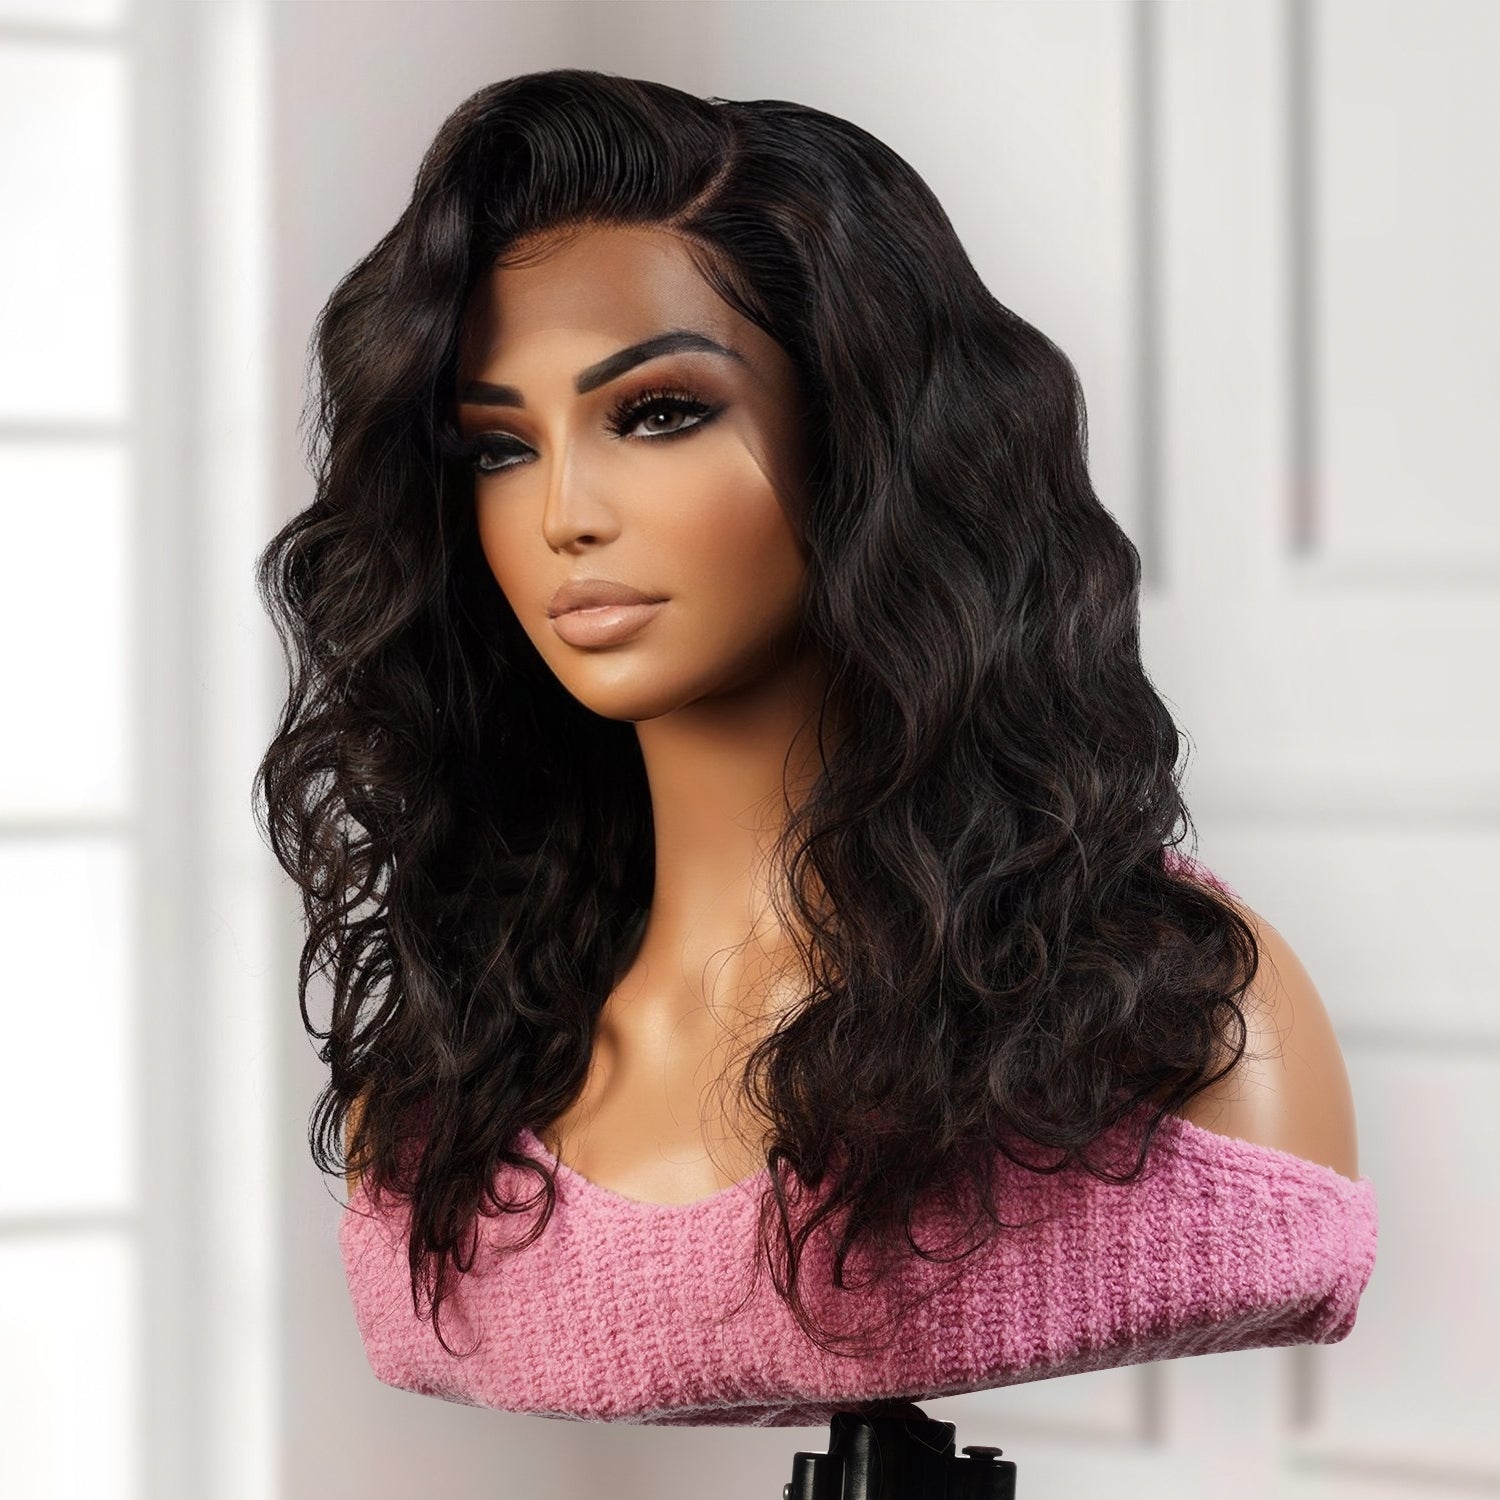 Brazilian Virgin Remi Human Hair 100% Hand Tied Full Lace 360 Lace Frontal Wig Body Wave 16"